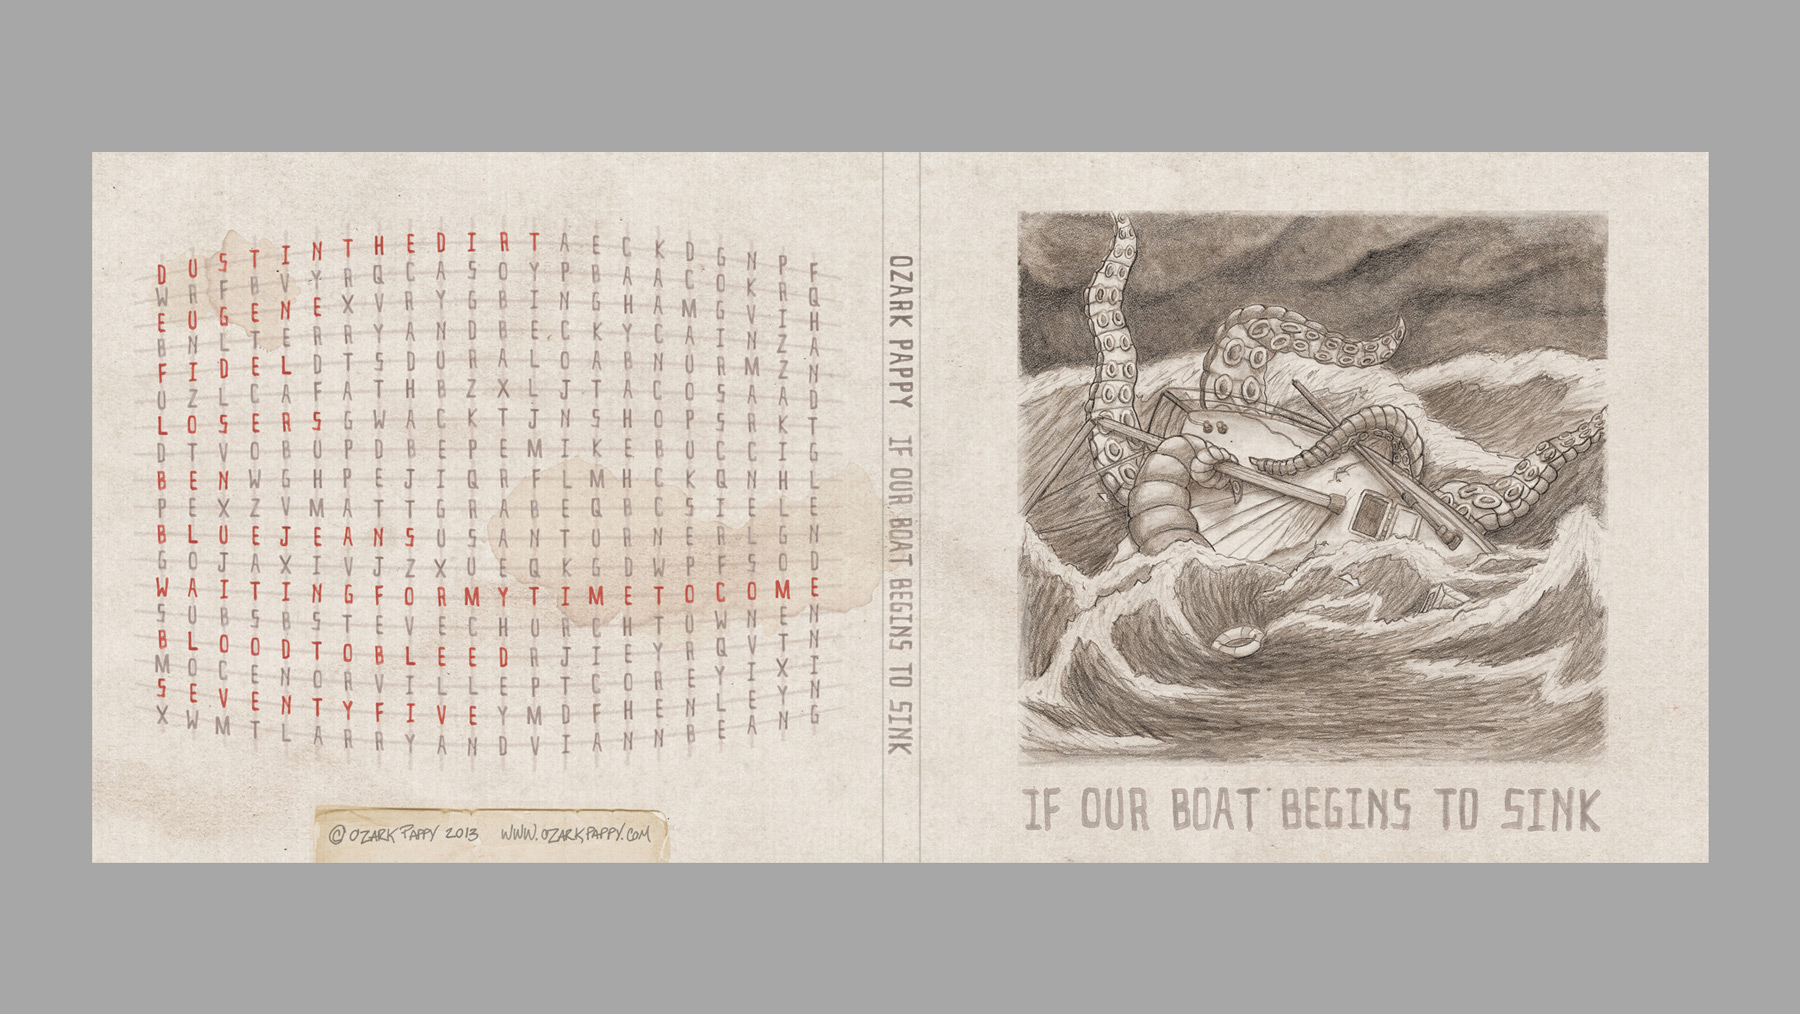 Album artwork - front and back - Ozark Pappy 'If Our Boat Begins to Sink'